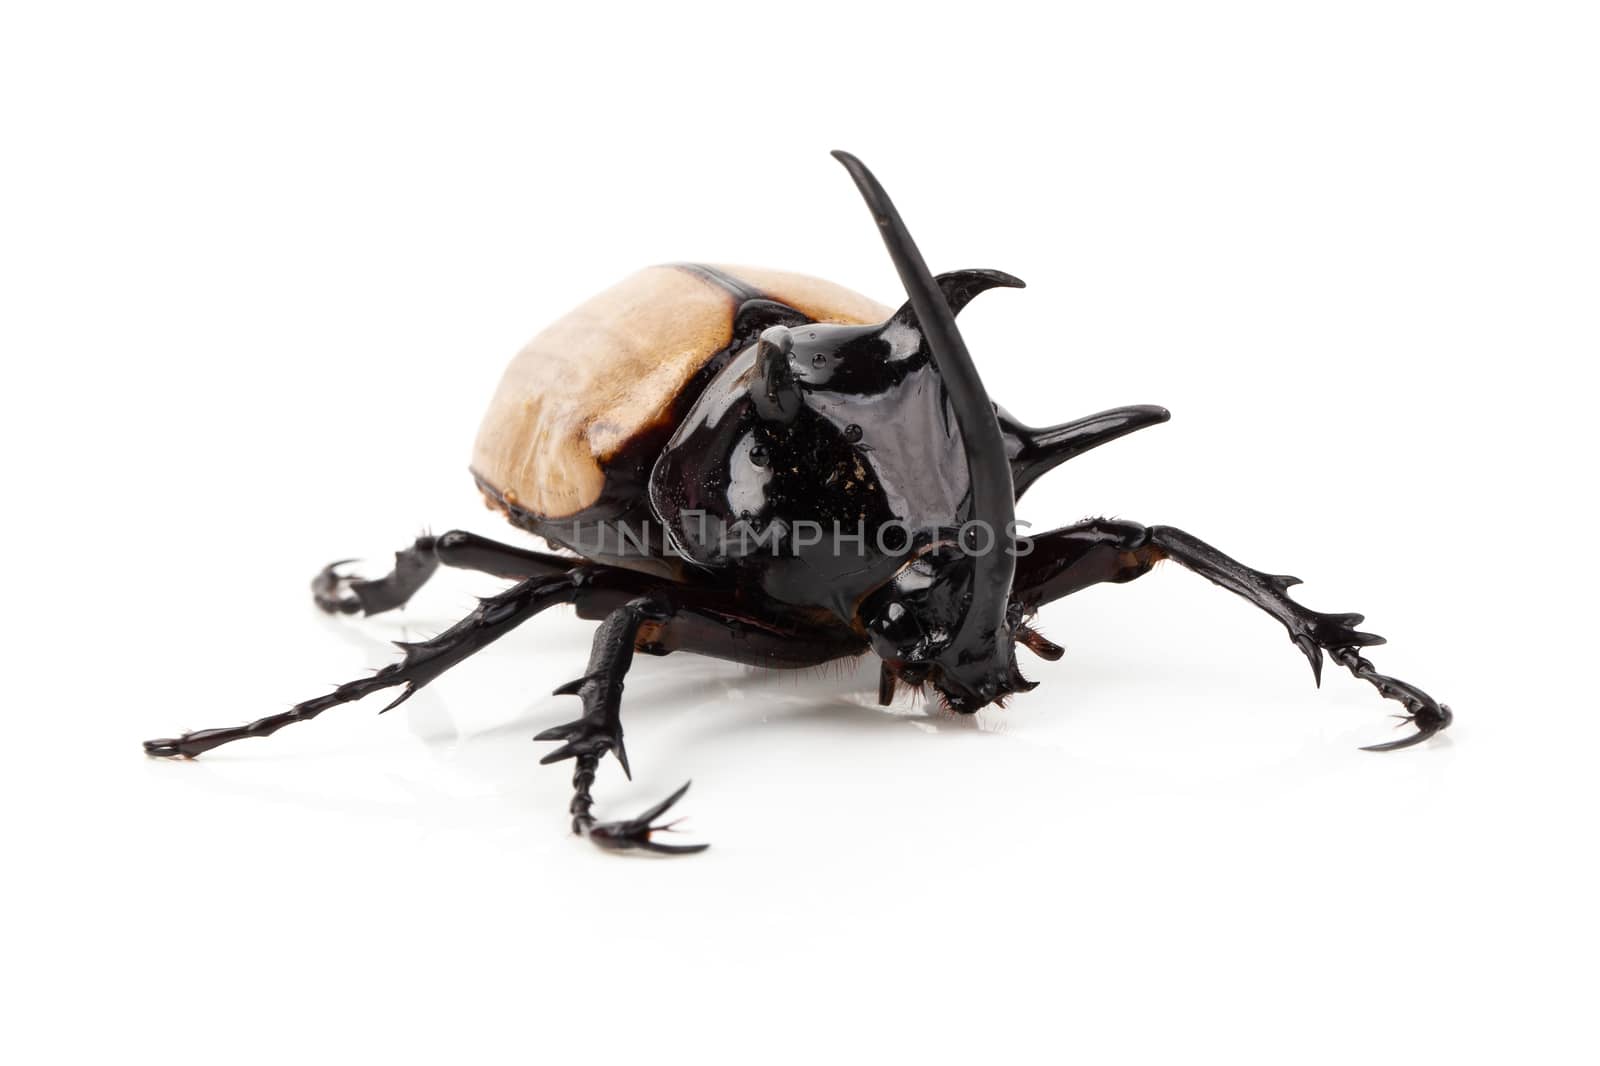 Yellow Five-horned rhinoceros beetle isolated on white backgroun by kaiskynet